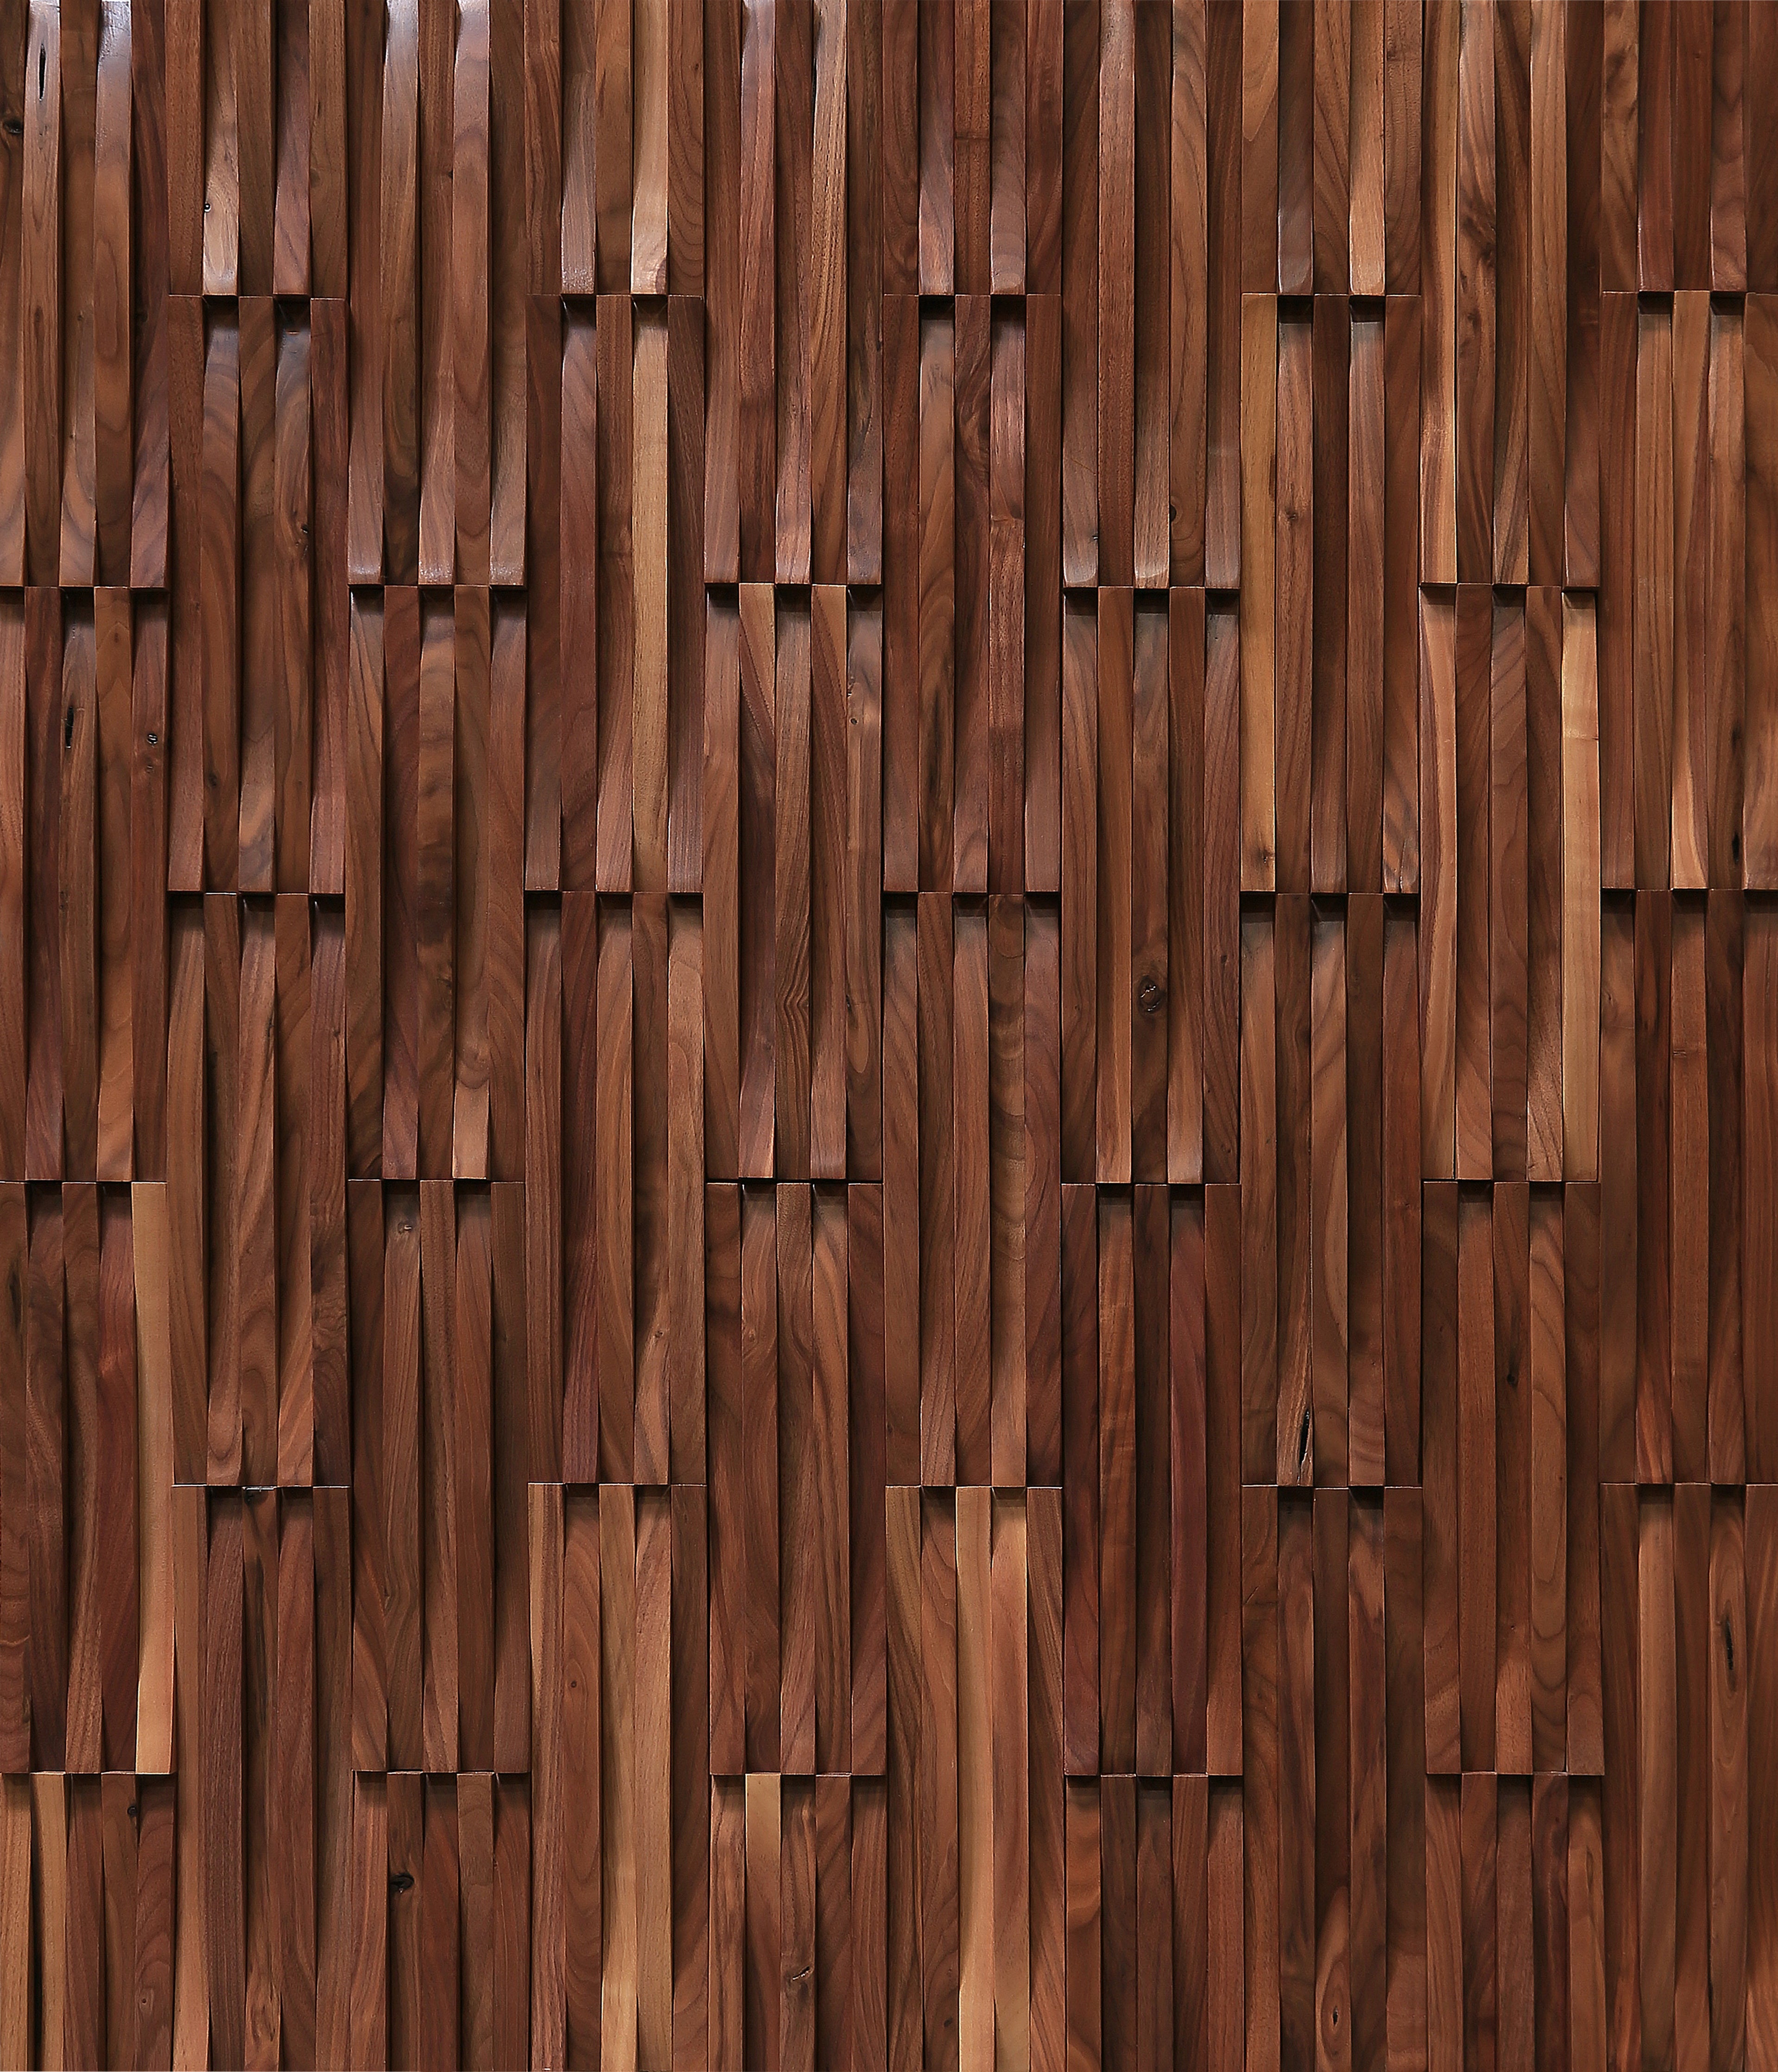 duchateau inceptiv curva american walnut three dimensional wall natural wood panel conversion varnish for interior use distributed by surface group international